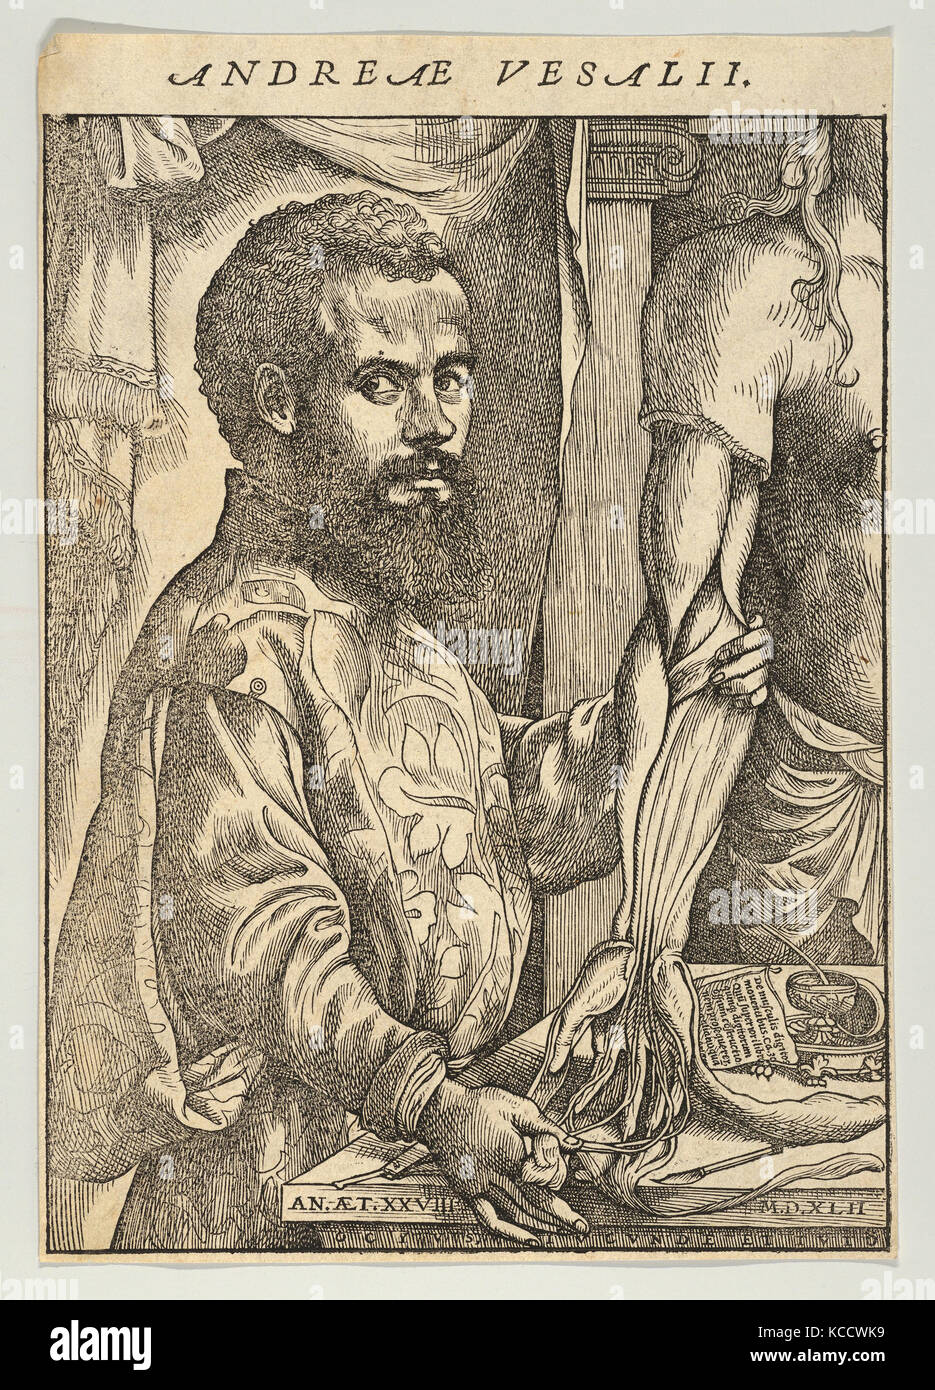 Drawings and Prints, Print, Portrait of Andreas Vesalius, half-length in profile standing in front of a table Stock Photo